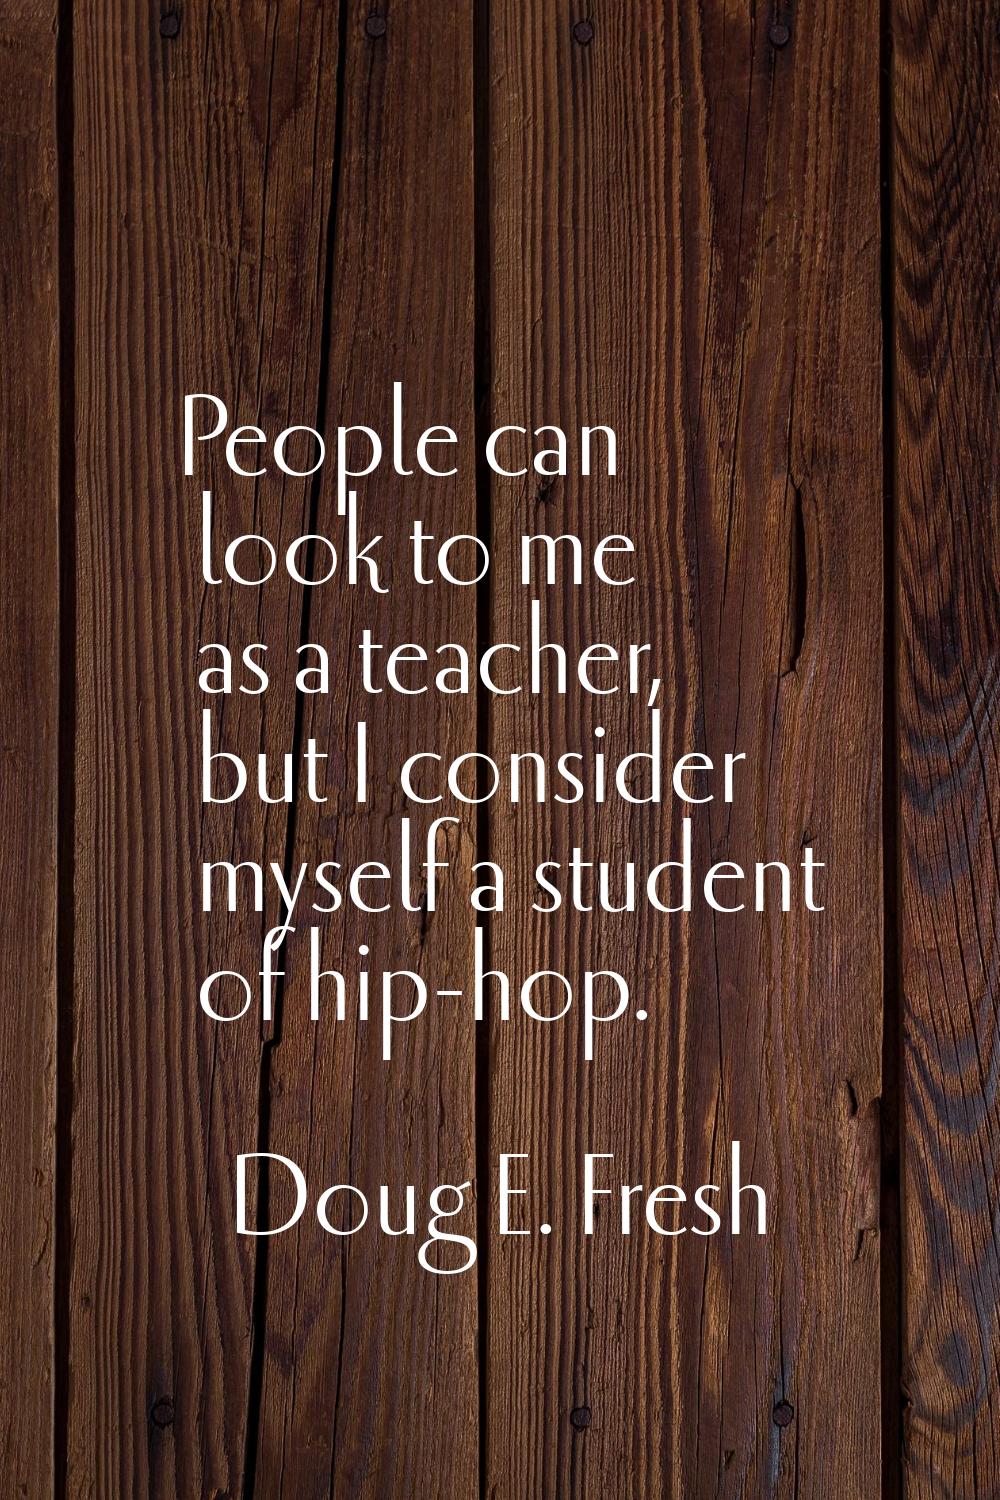 People can look to me as a teacher, but I consider myself a student of hip-hop.